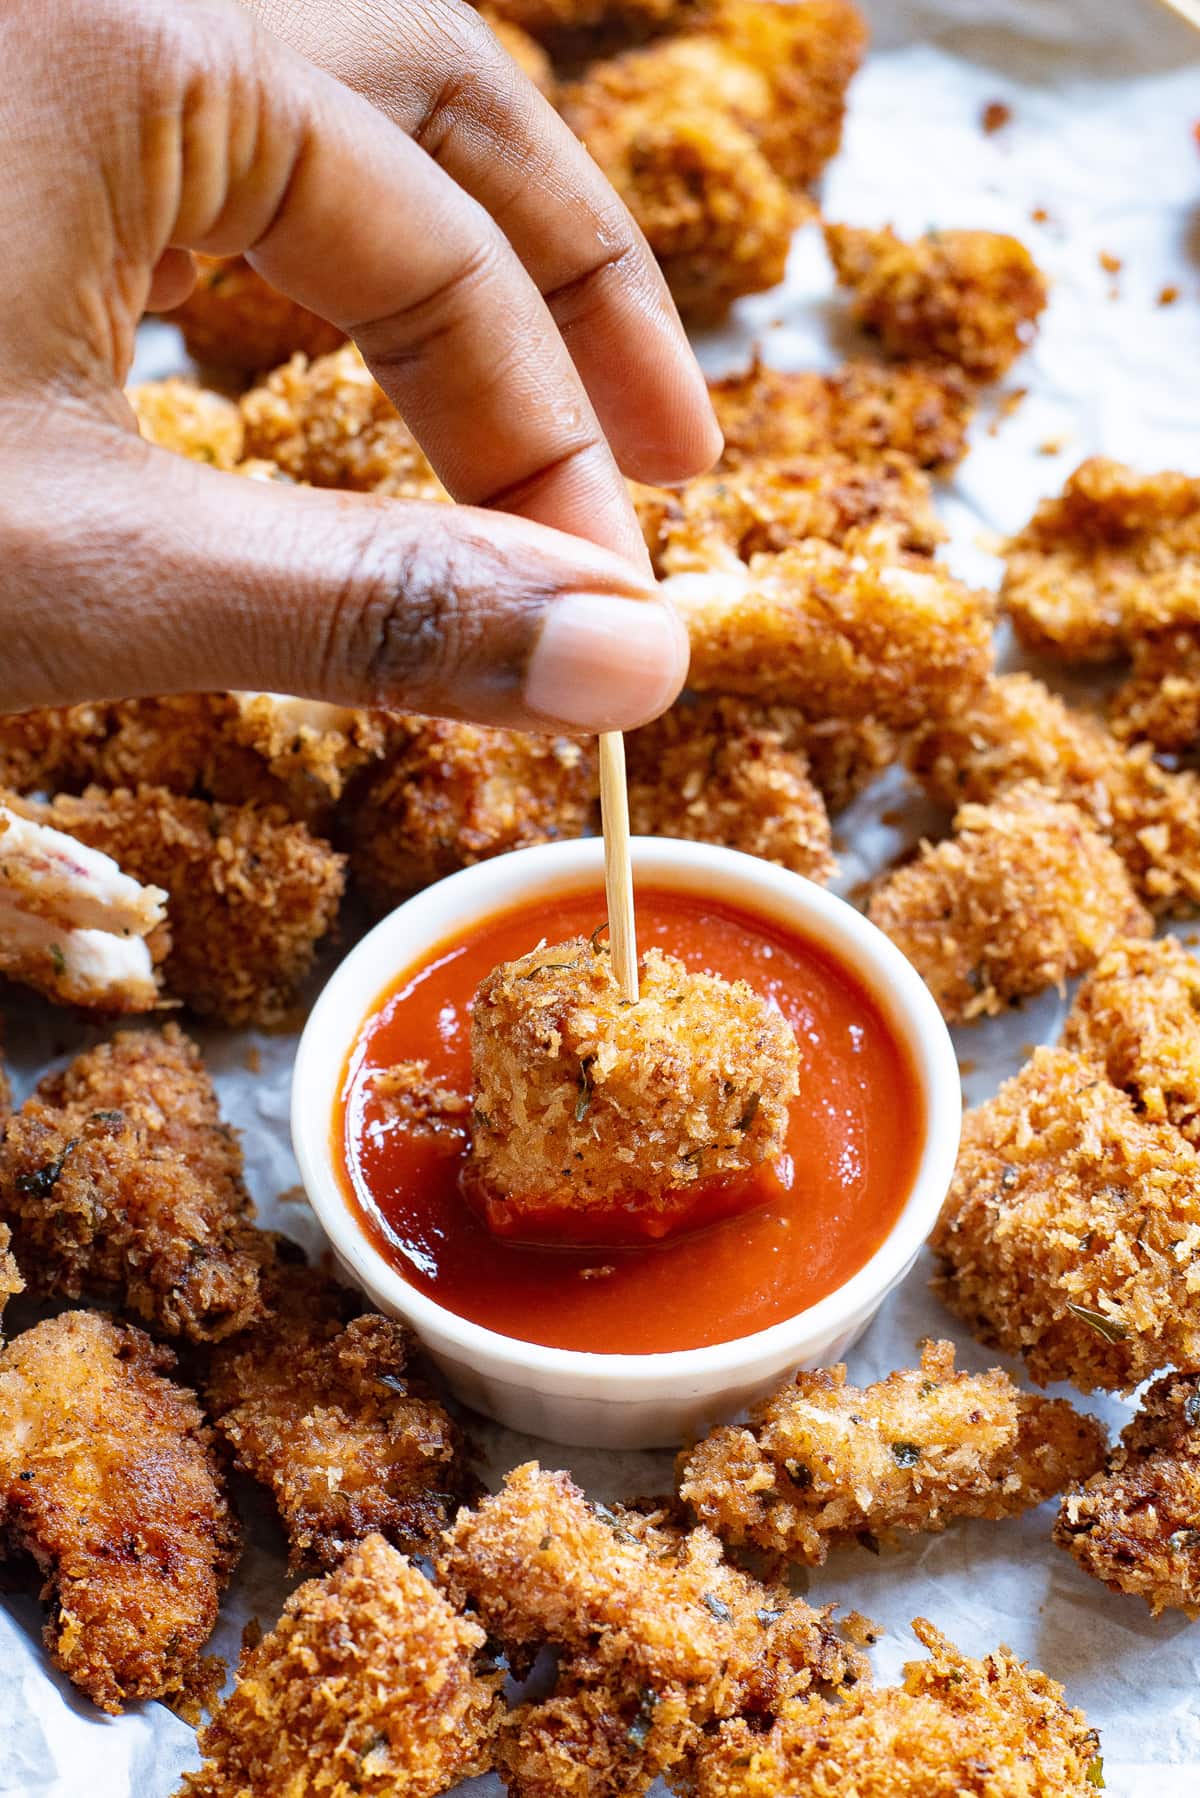 A hand holding a piece of popcorn chicken on a toothpick dipping it into ketchup